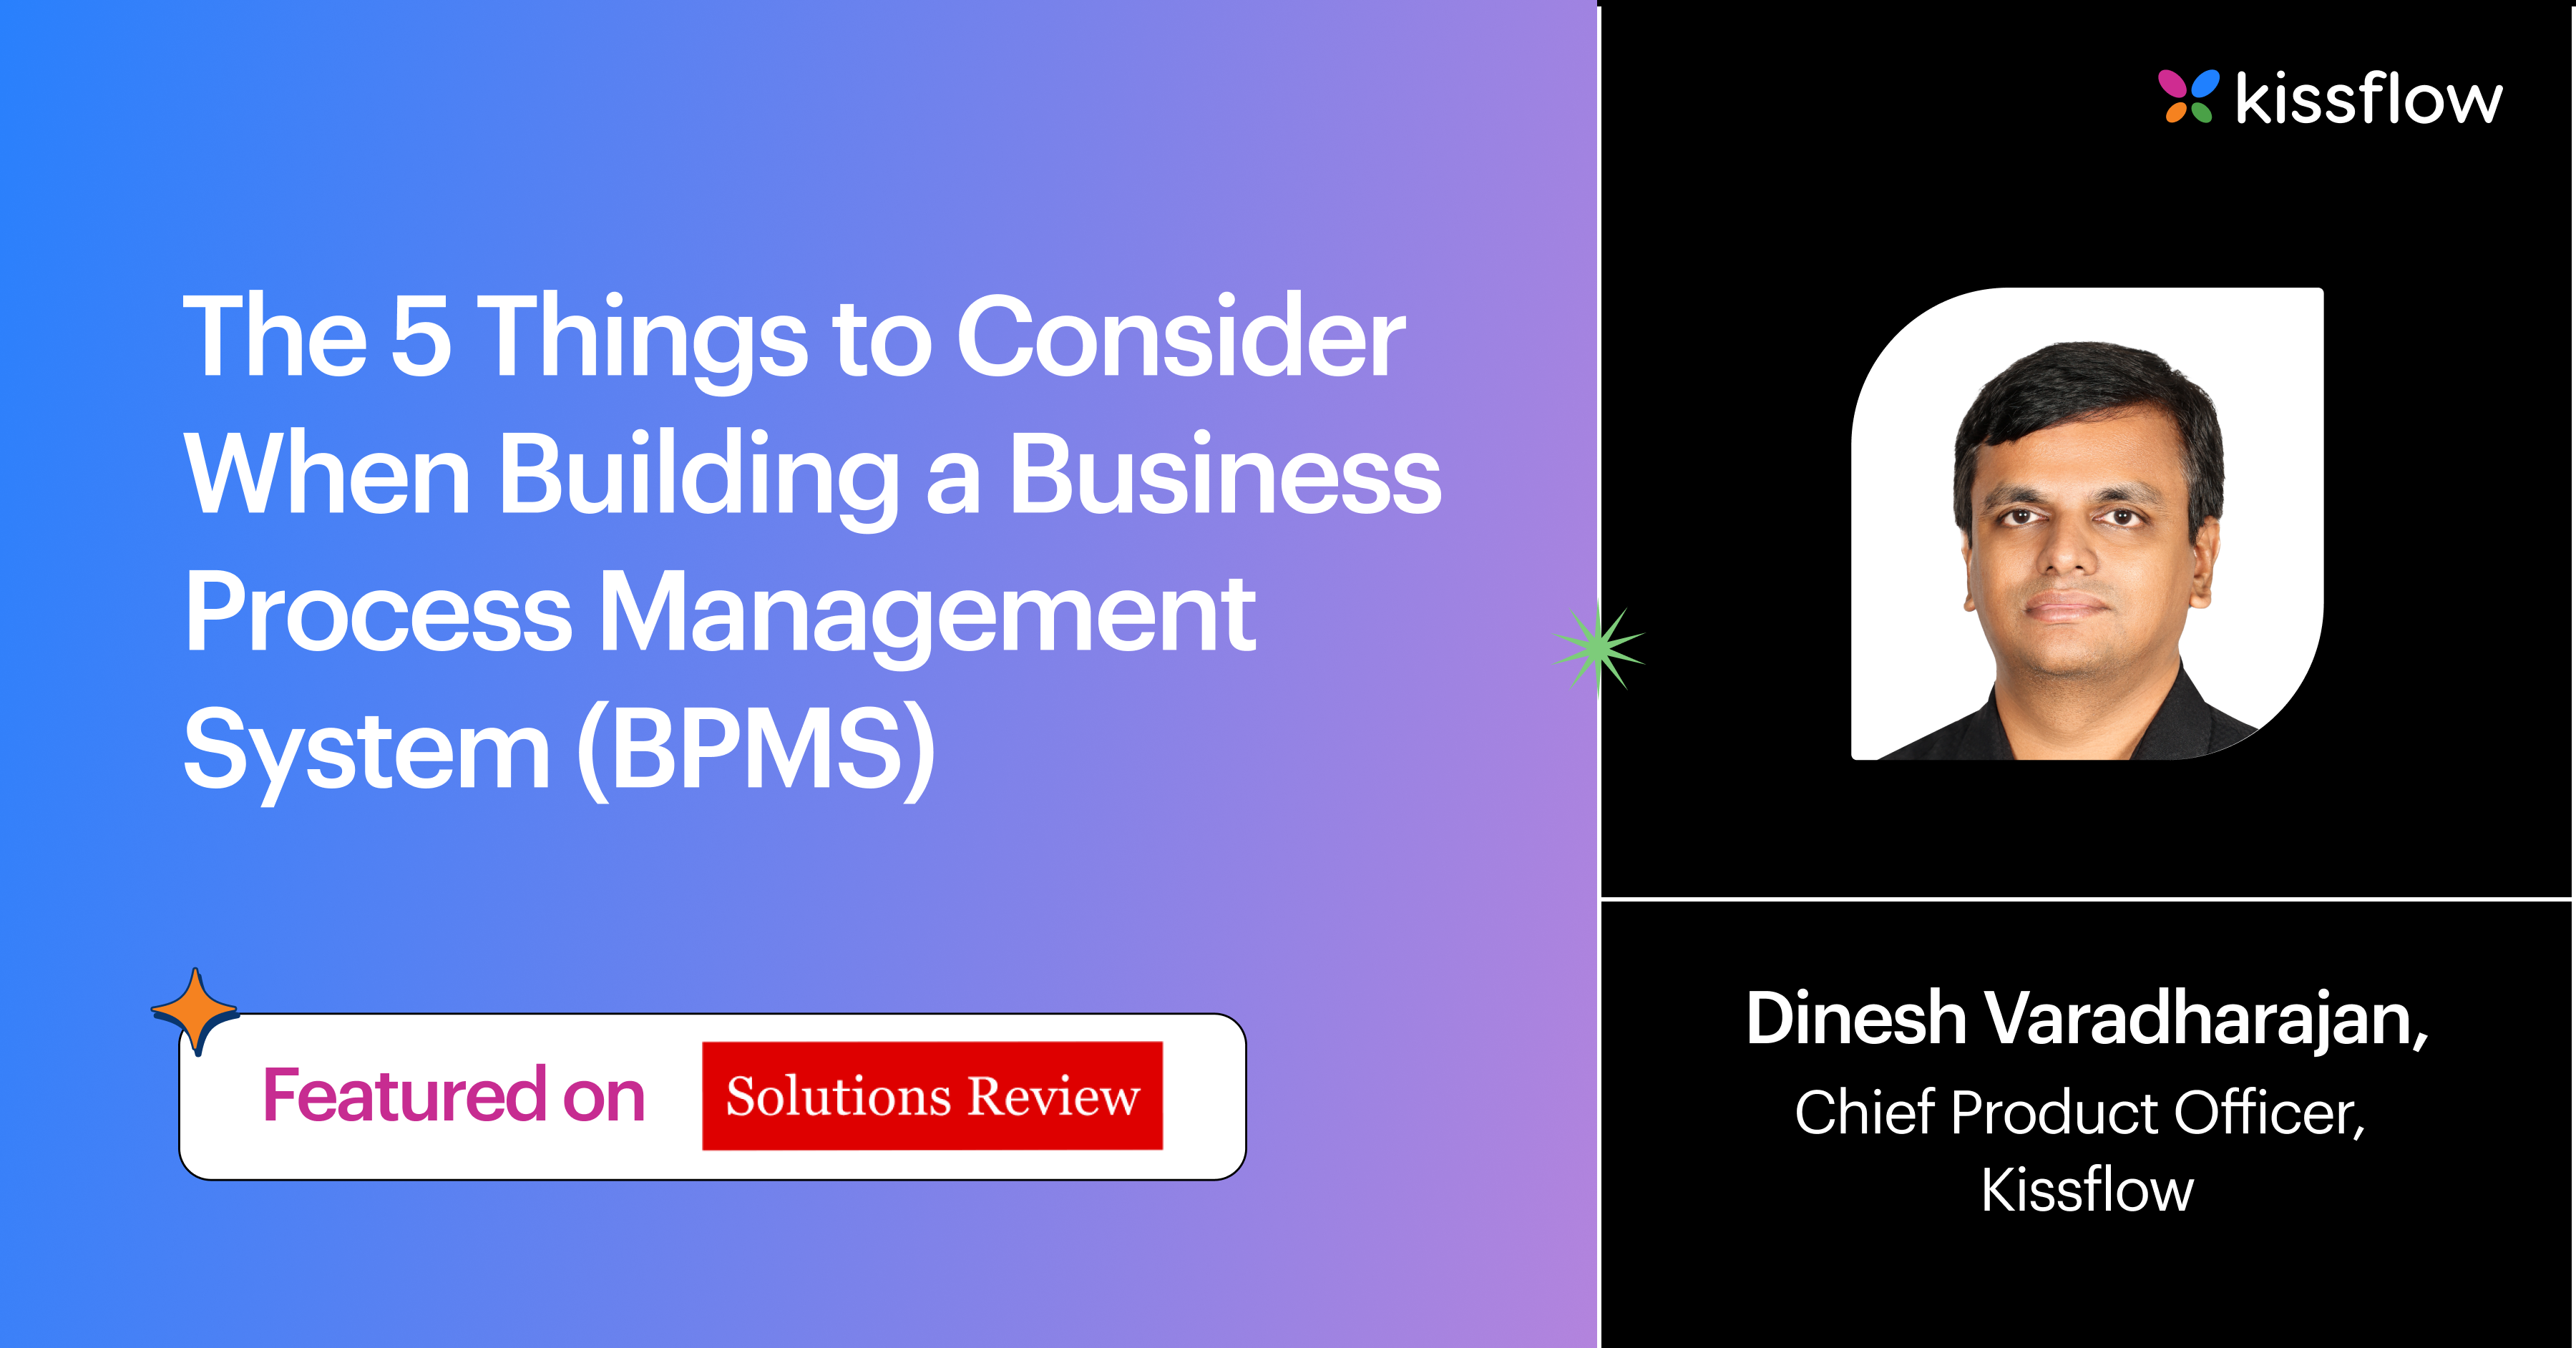 The 5 Things to Consider When Building a Business Process Management System (BPMS)